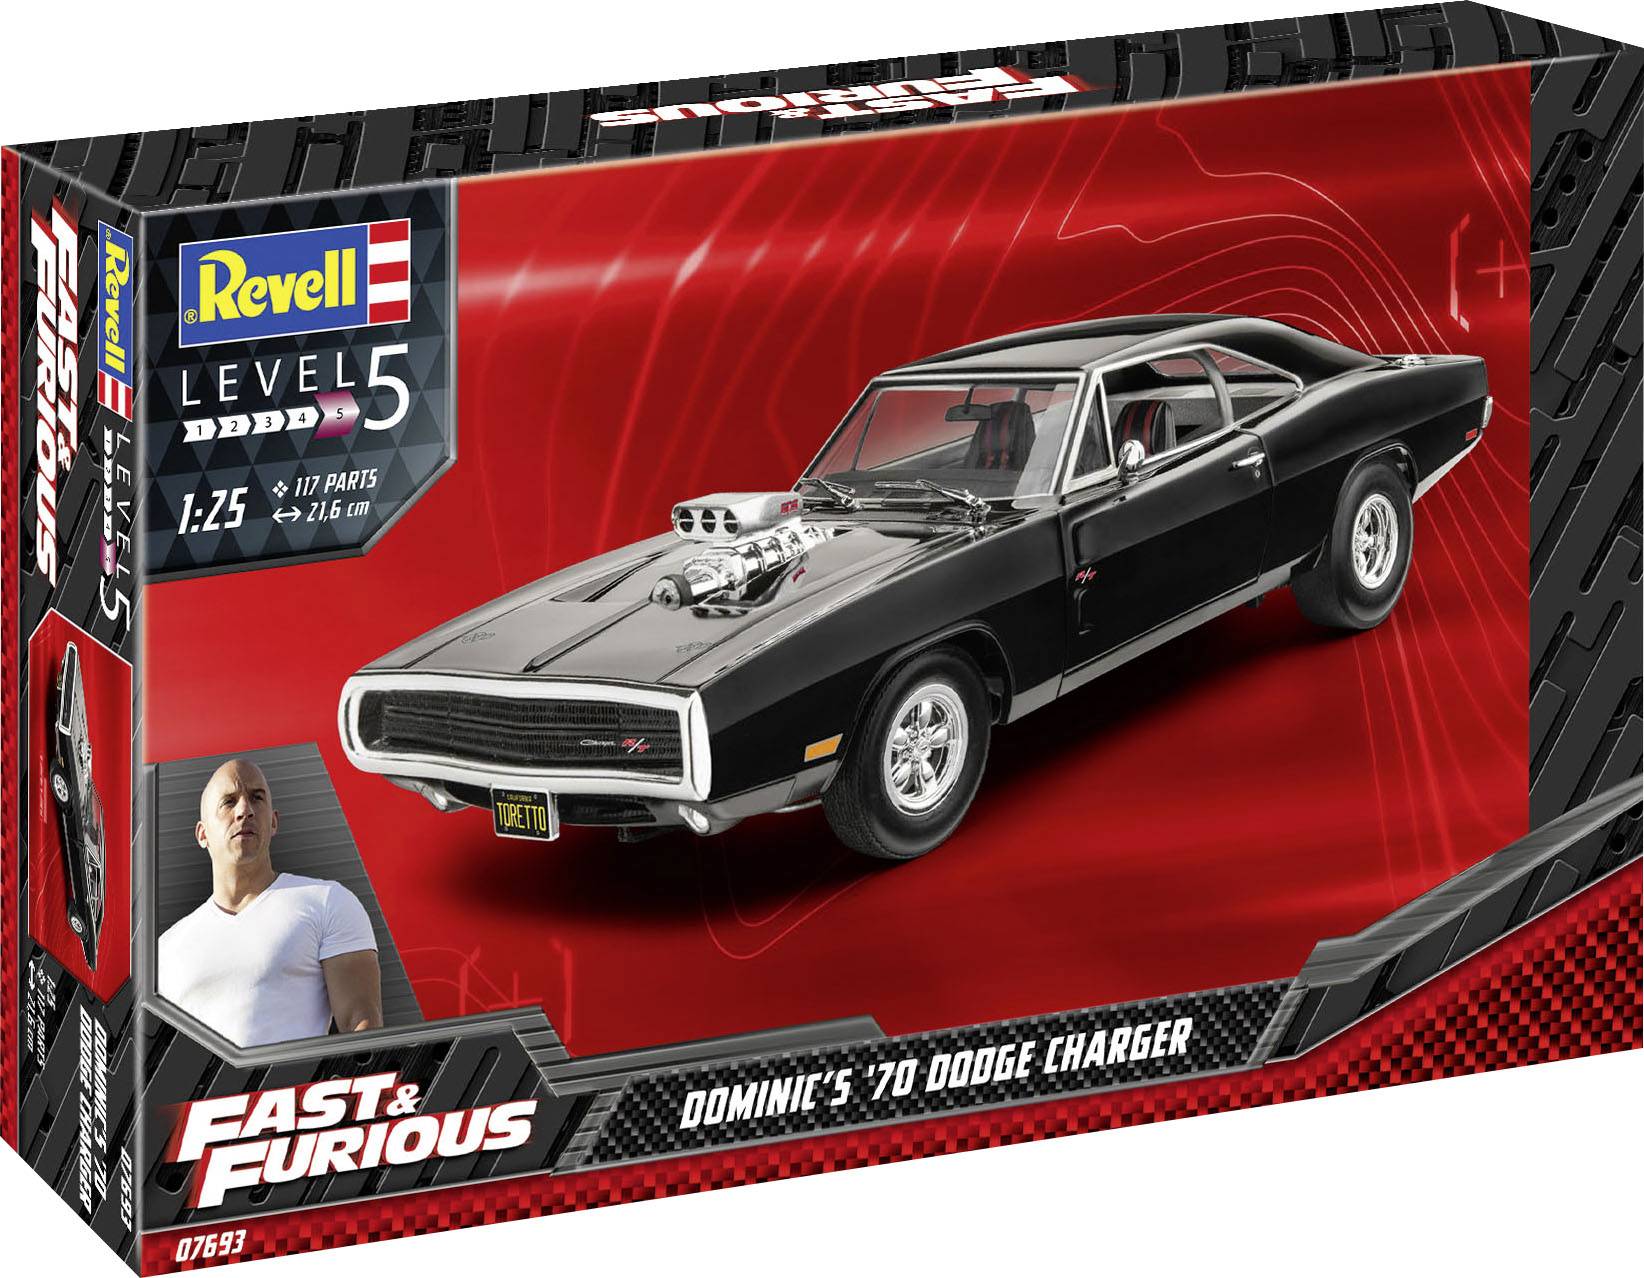 Revell RV 1:24 Fast & Furious - Dominics 1970 Dodge Charger 1:24 Model car  